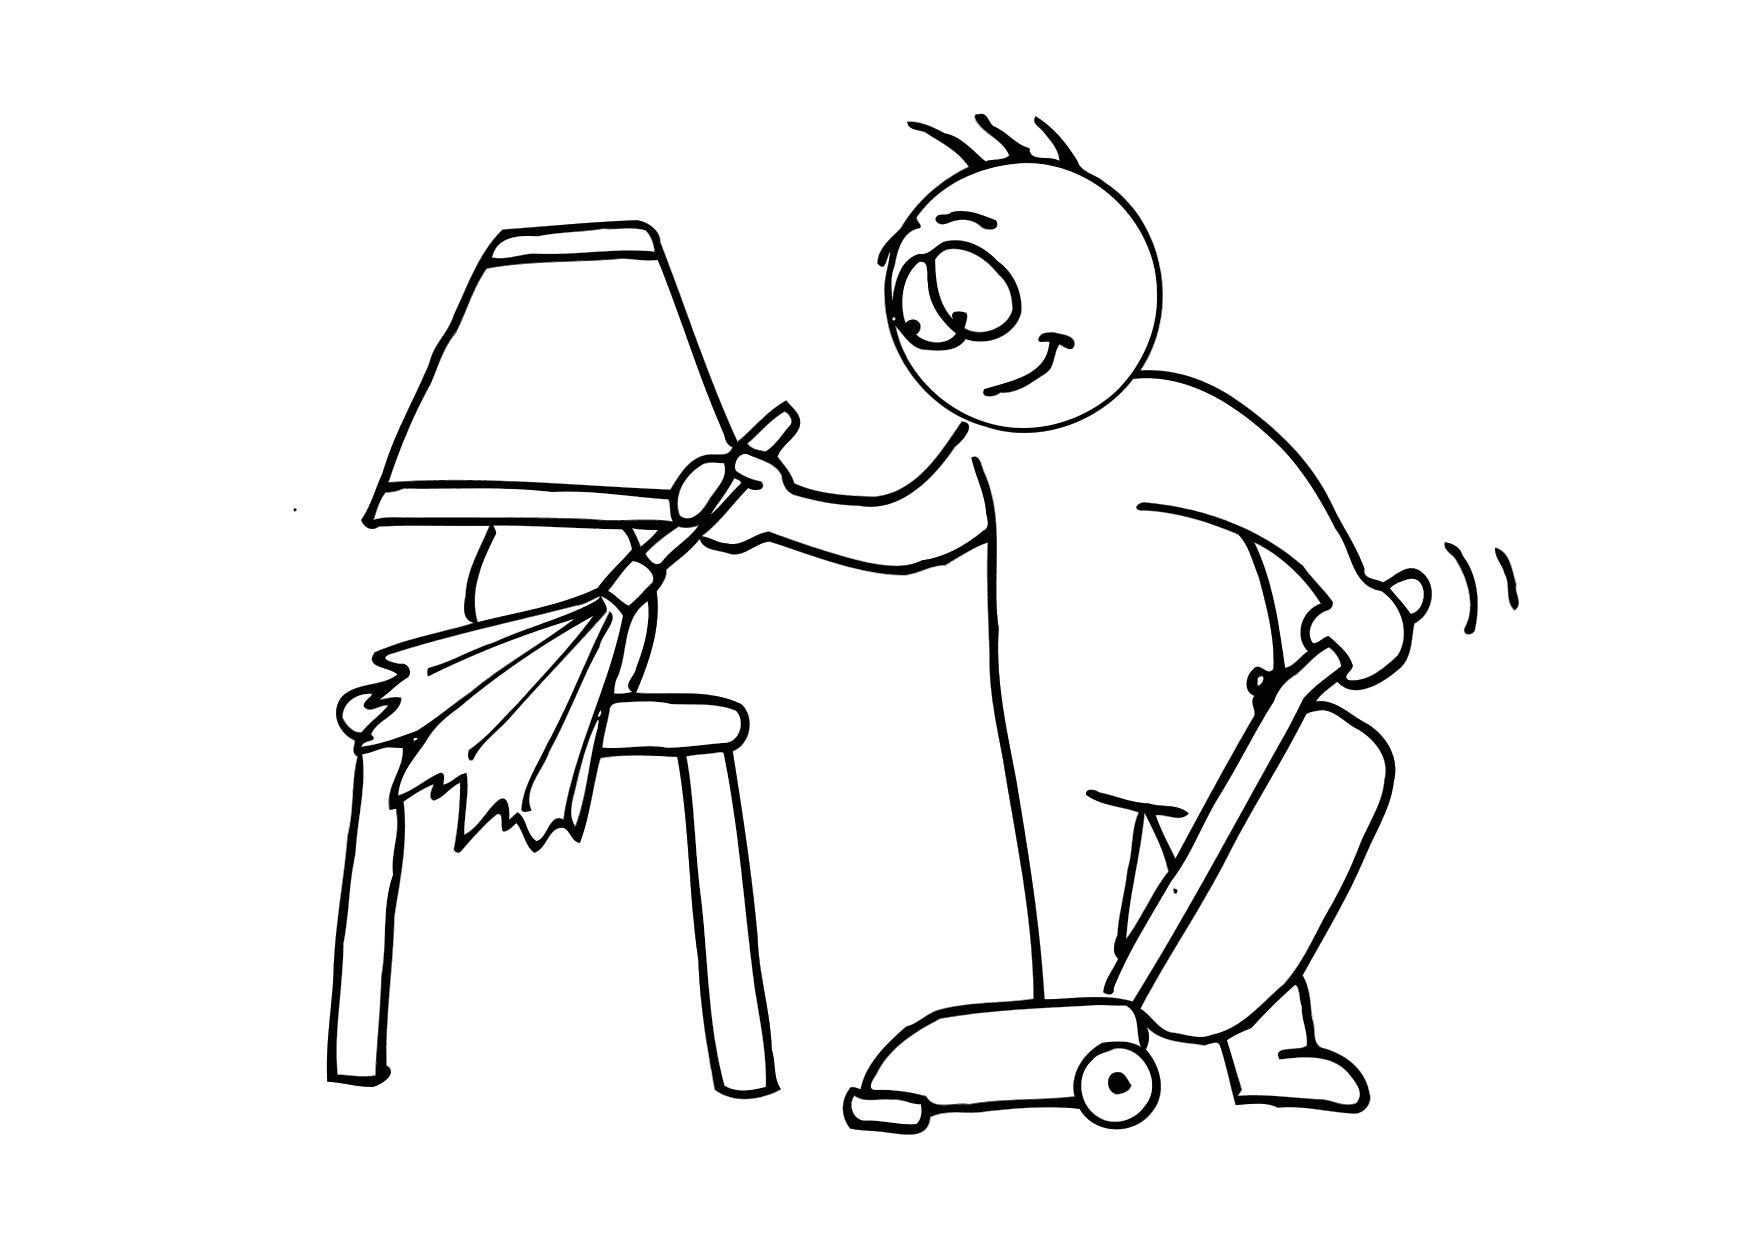 Coloring page house cleaning img 11688.